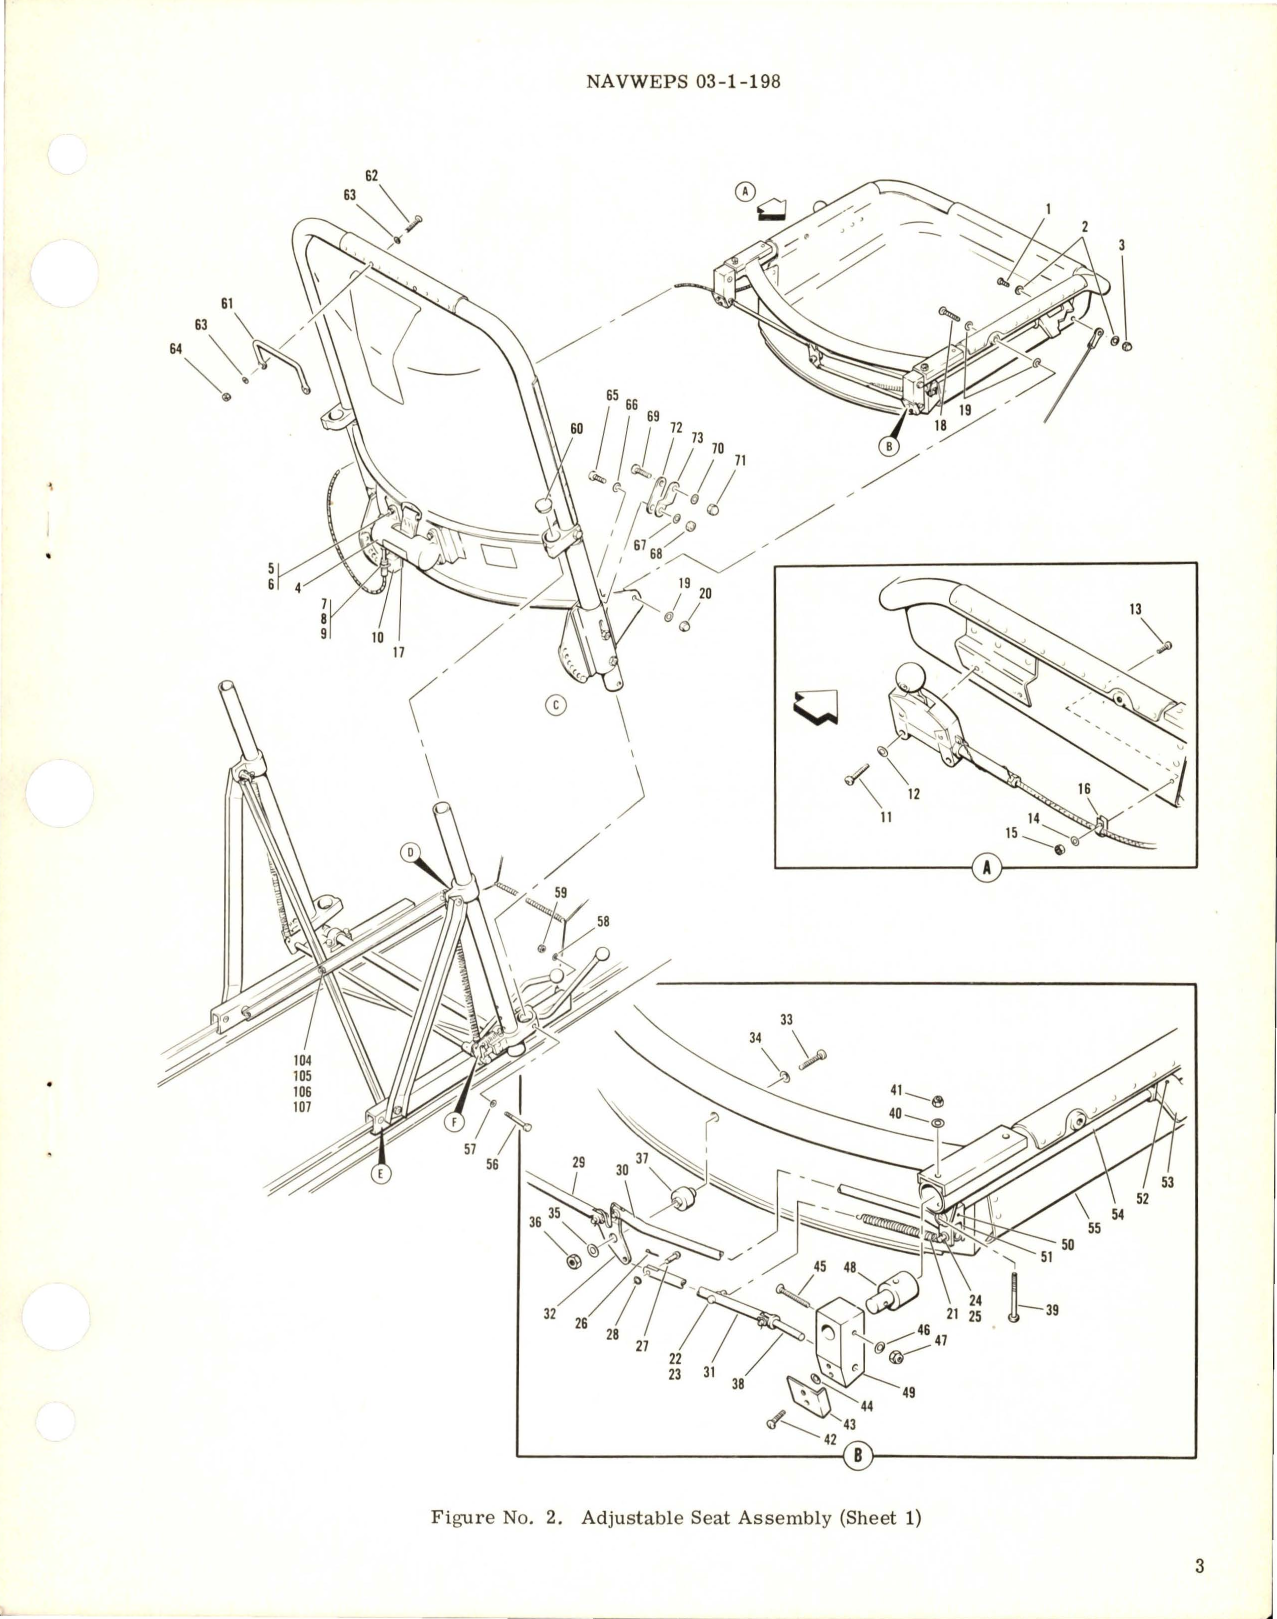 Sample page 5 from AirCorps Library document: Overhaul Instructions with Illustrated Parts Breakdown for Adjustable Seat - 851-1